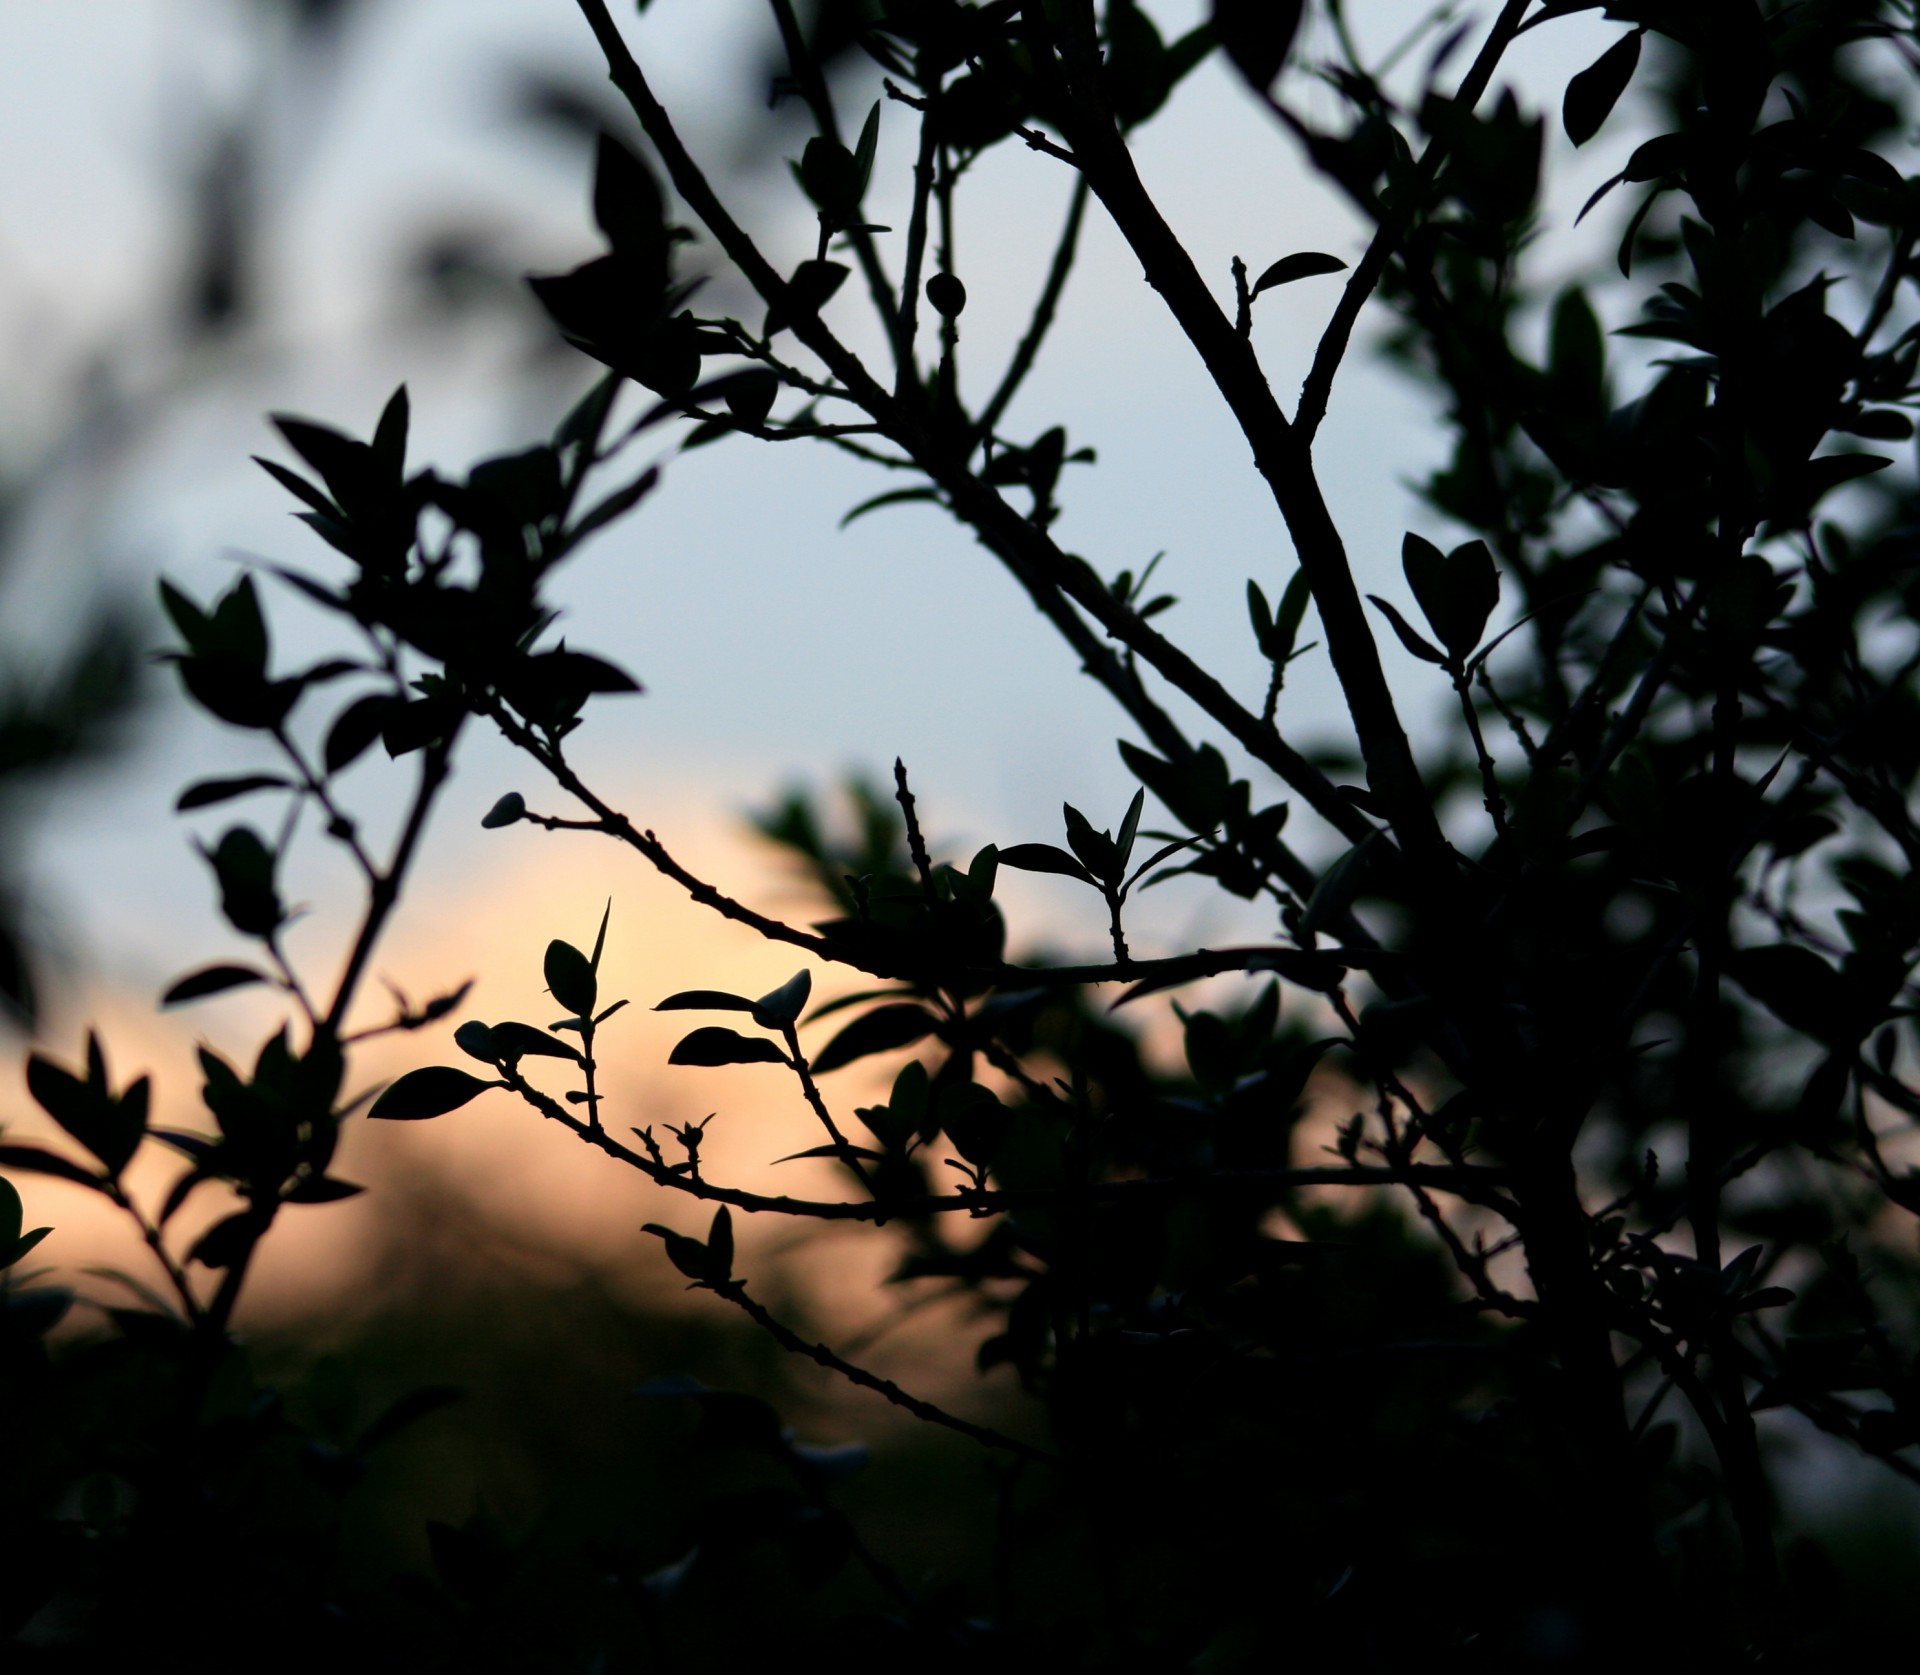 Shrub In Silhouette At Sunset